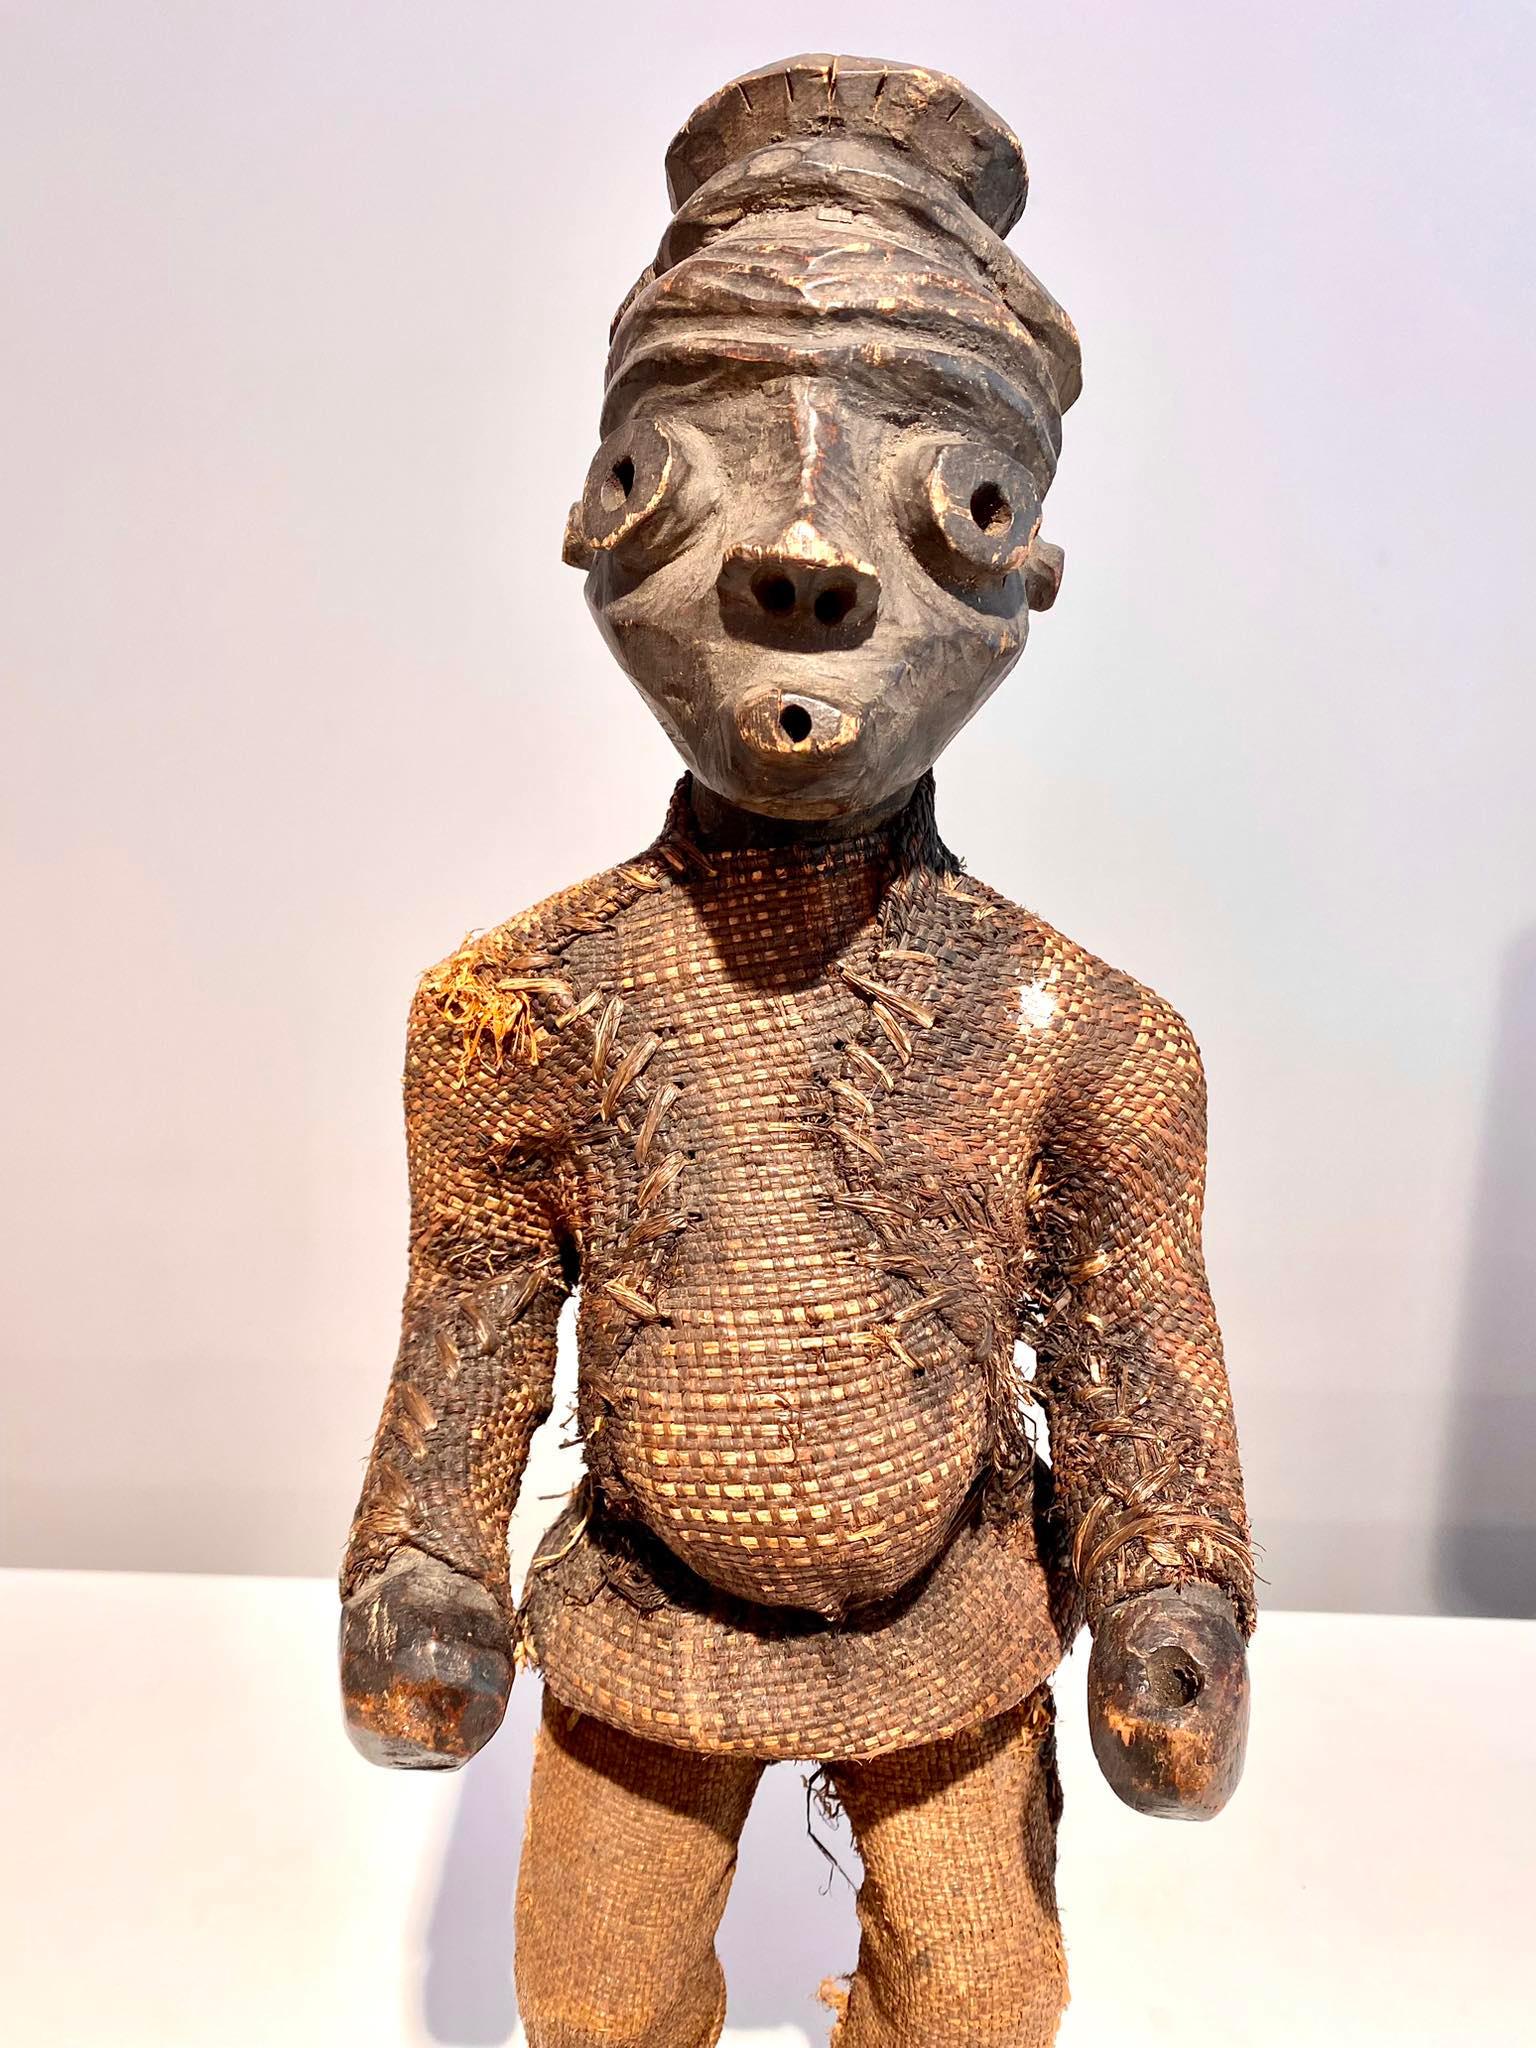 Congolese Wooden Pende Antropomorphic Statue Congo Region Kasaï -19th century African Art For Sale